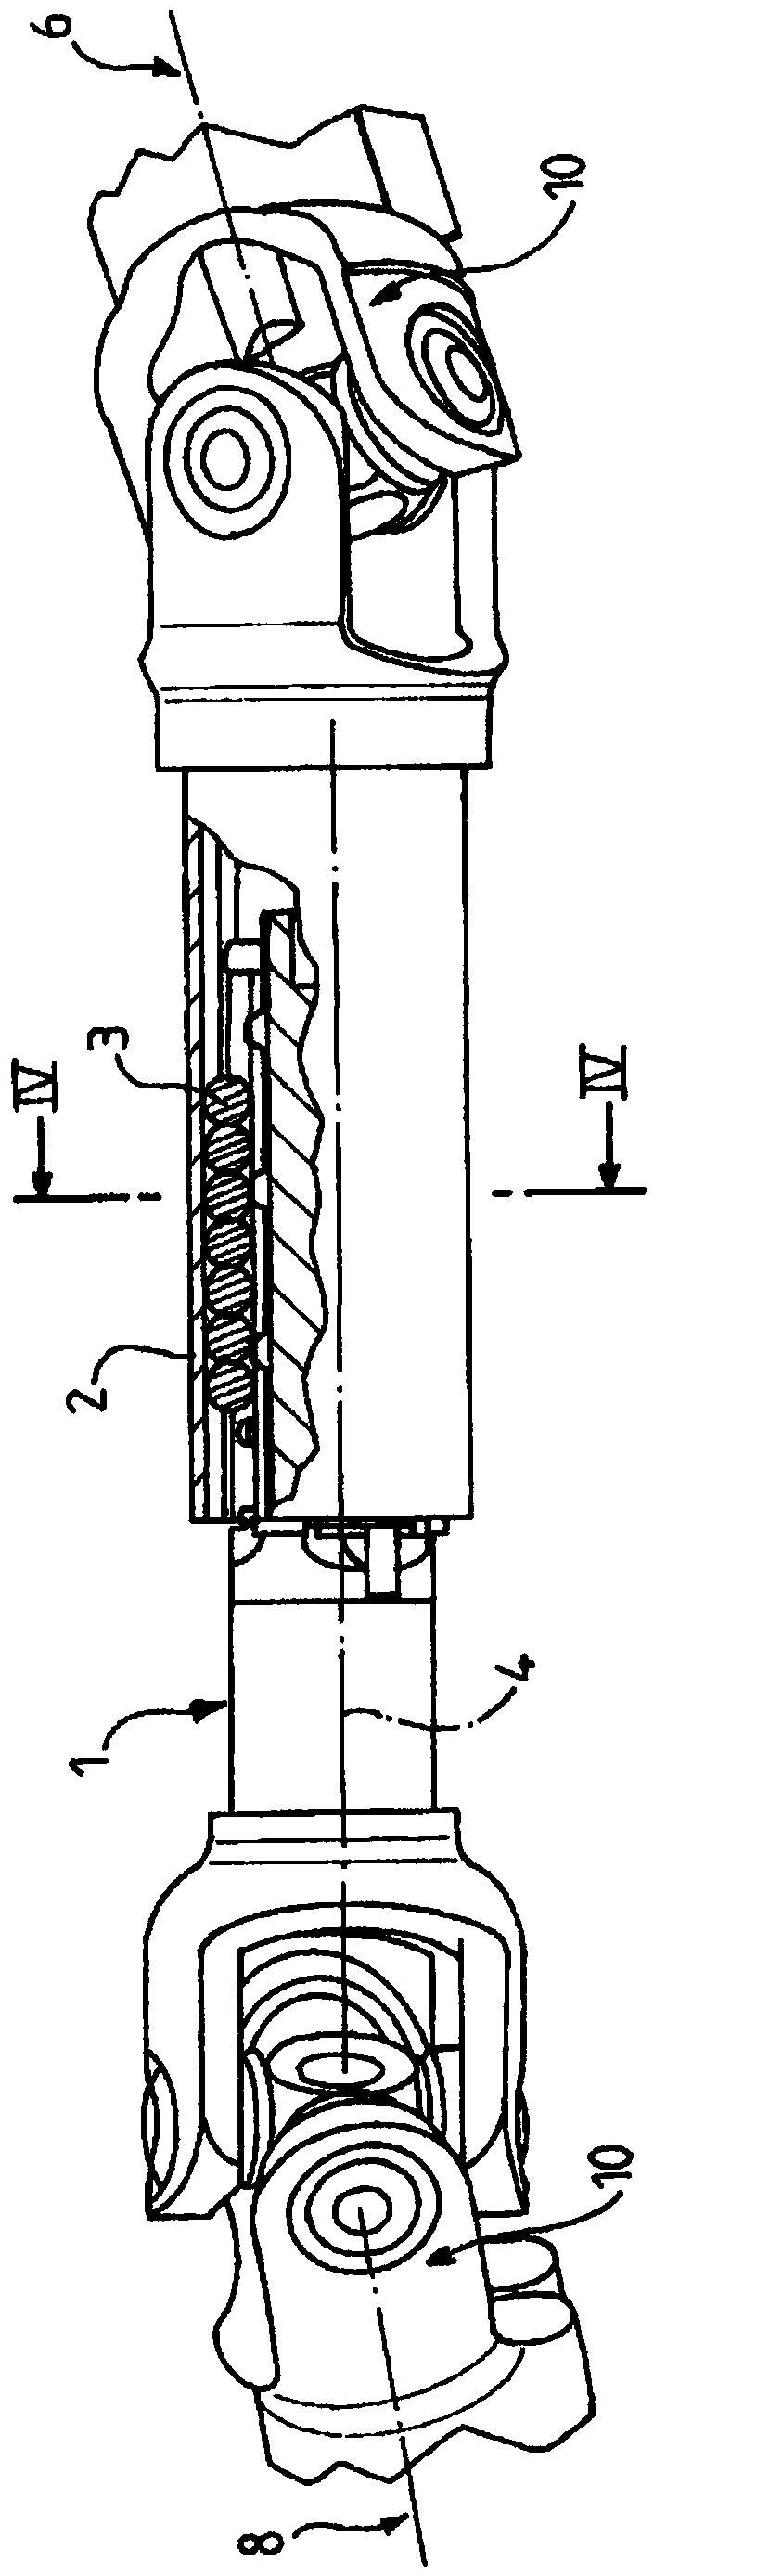 Spherical hinged connection device for two sliding shafts